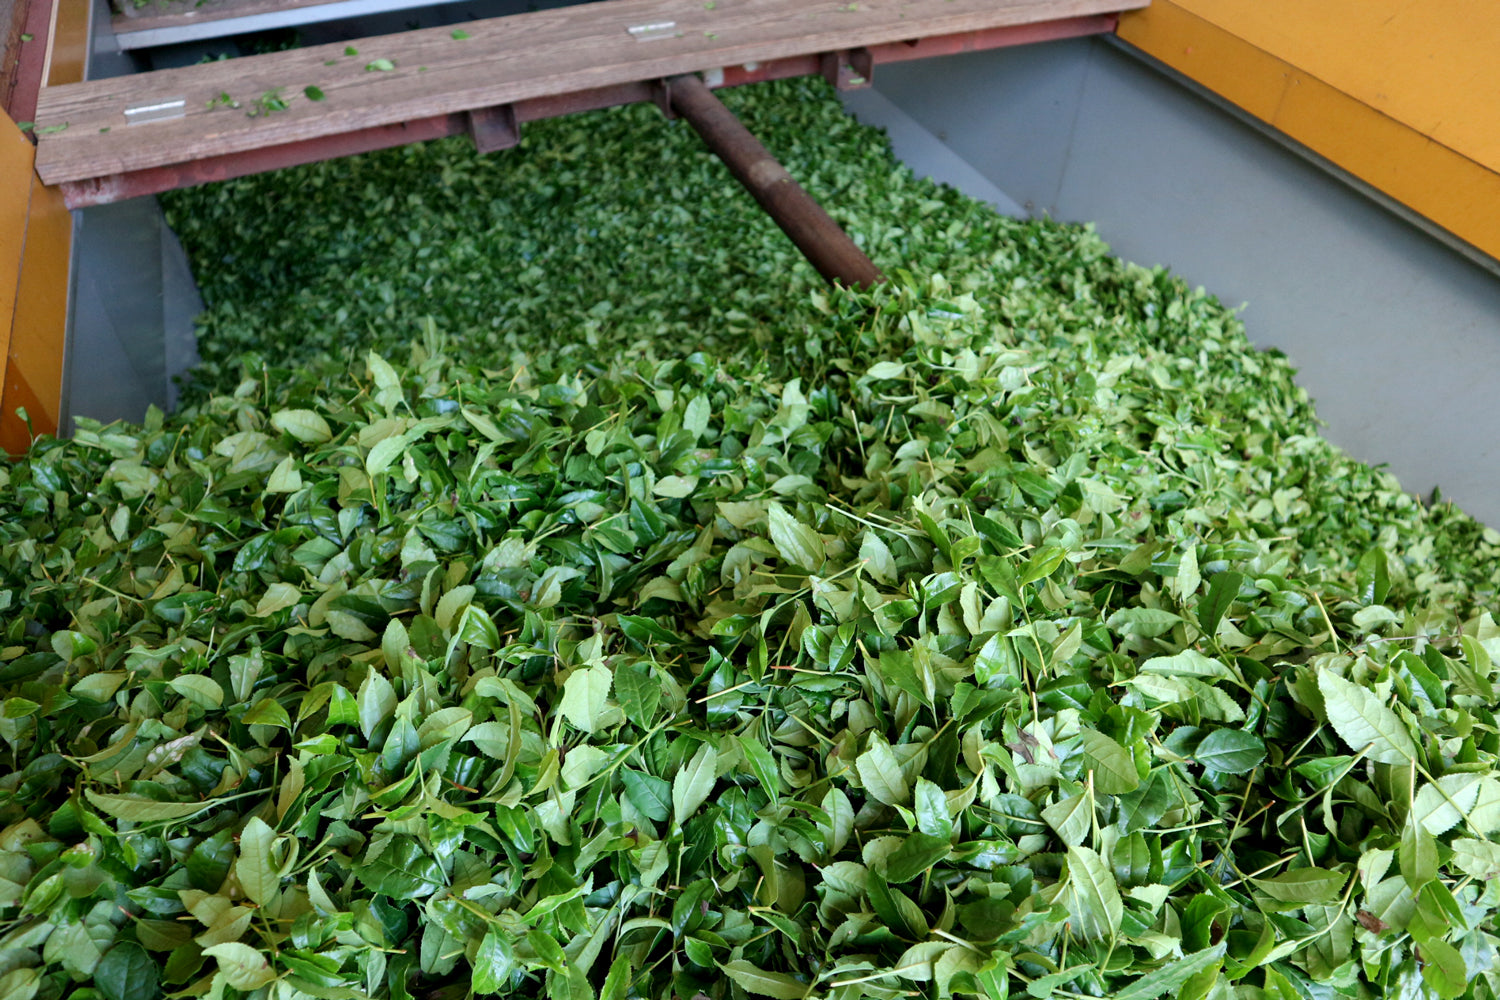 Bright, freshly harvested matcha leaves, ready to be processed.